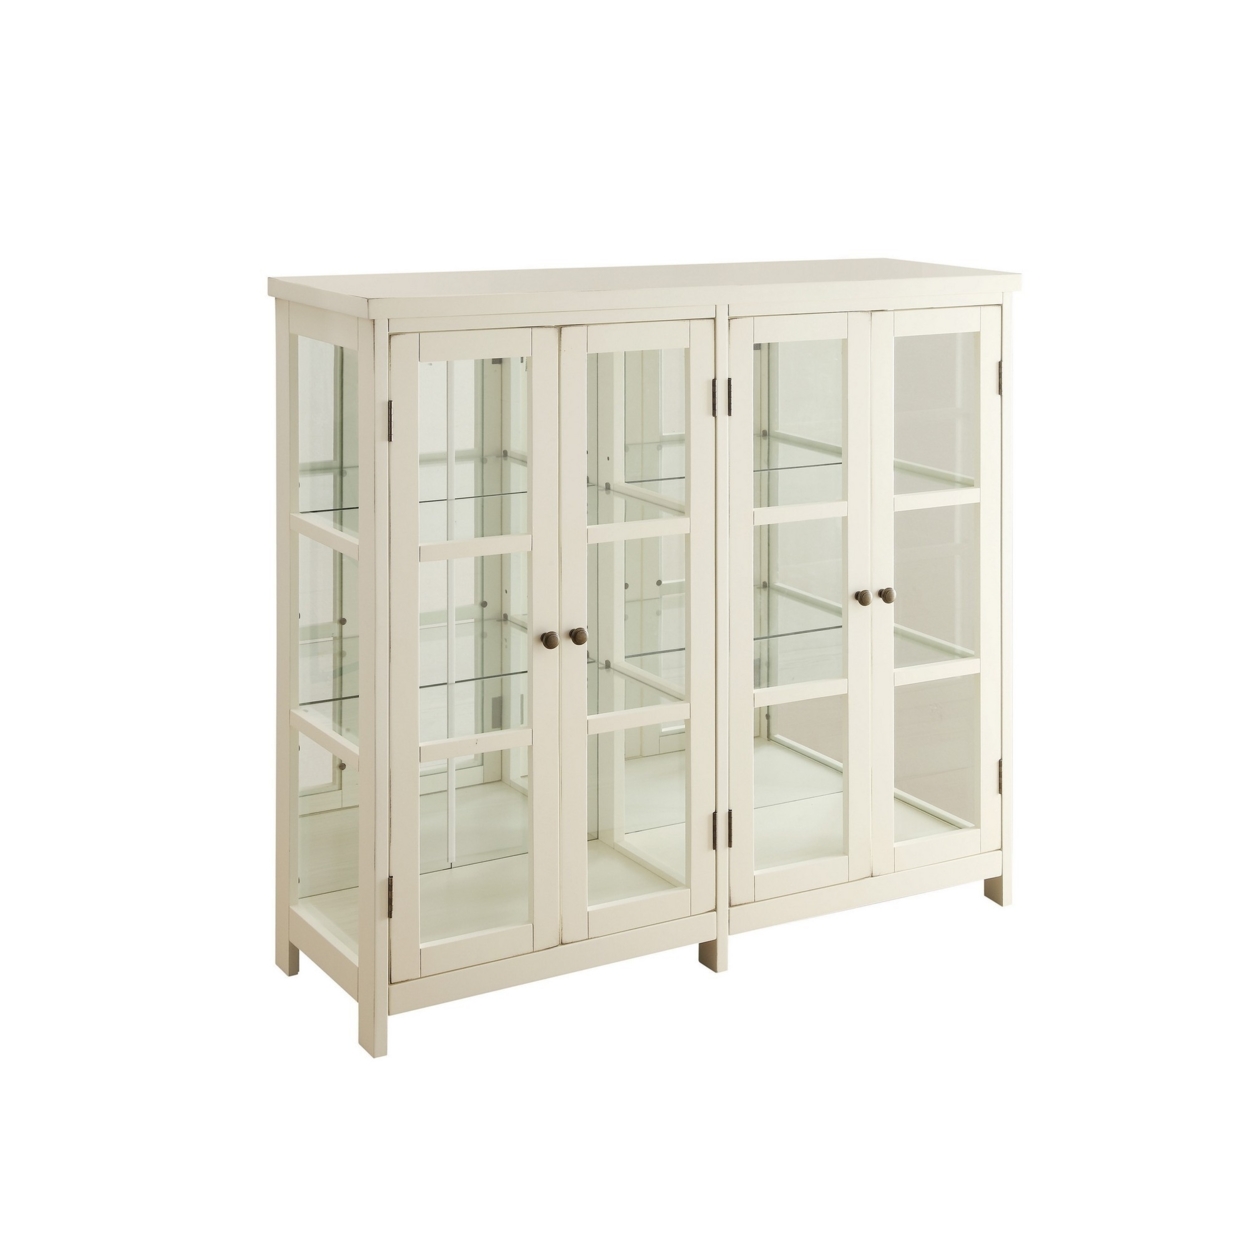 Transitional Style Wooden Accent Display Cabinet , White- Saltoro Sherpi